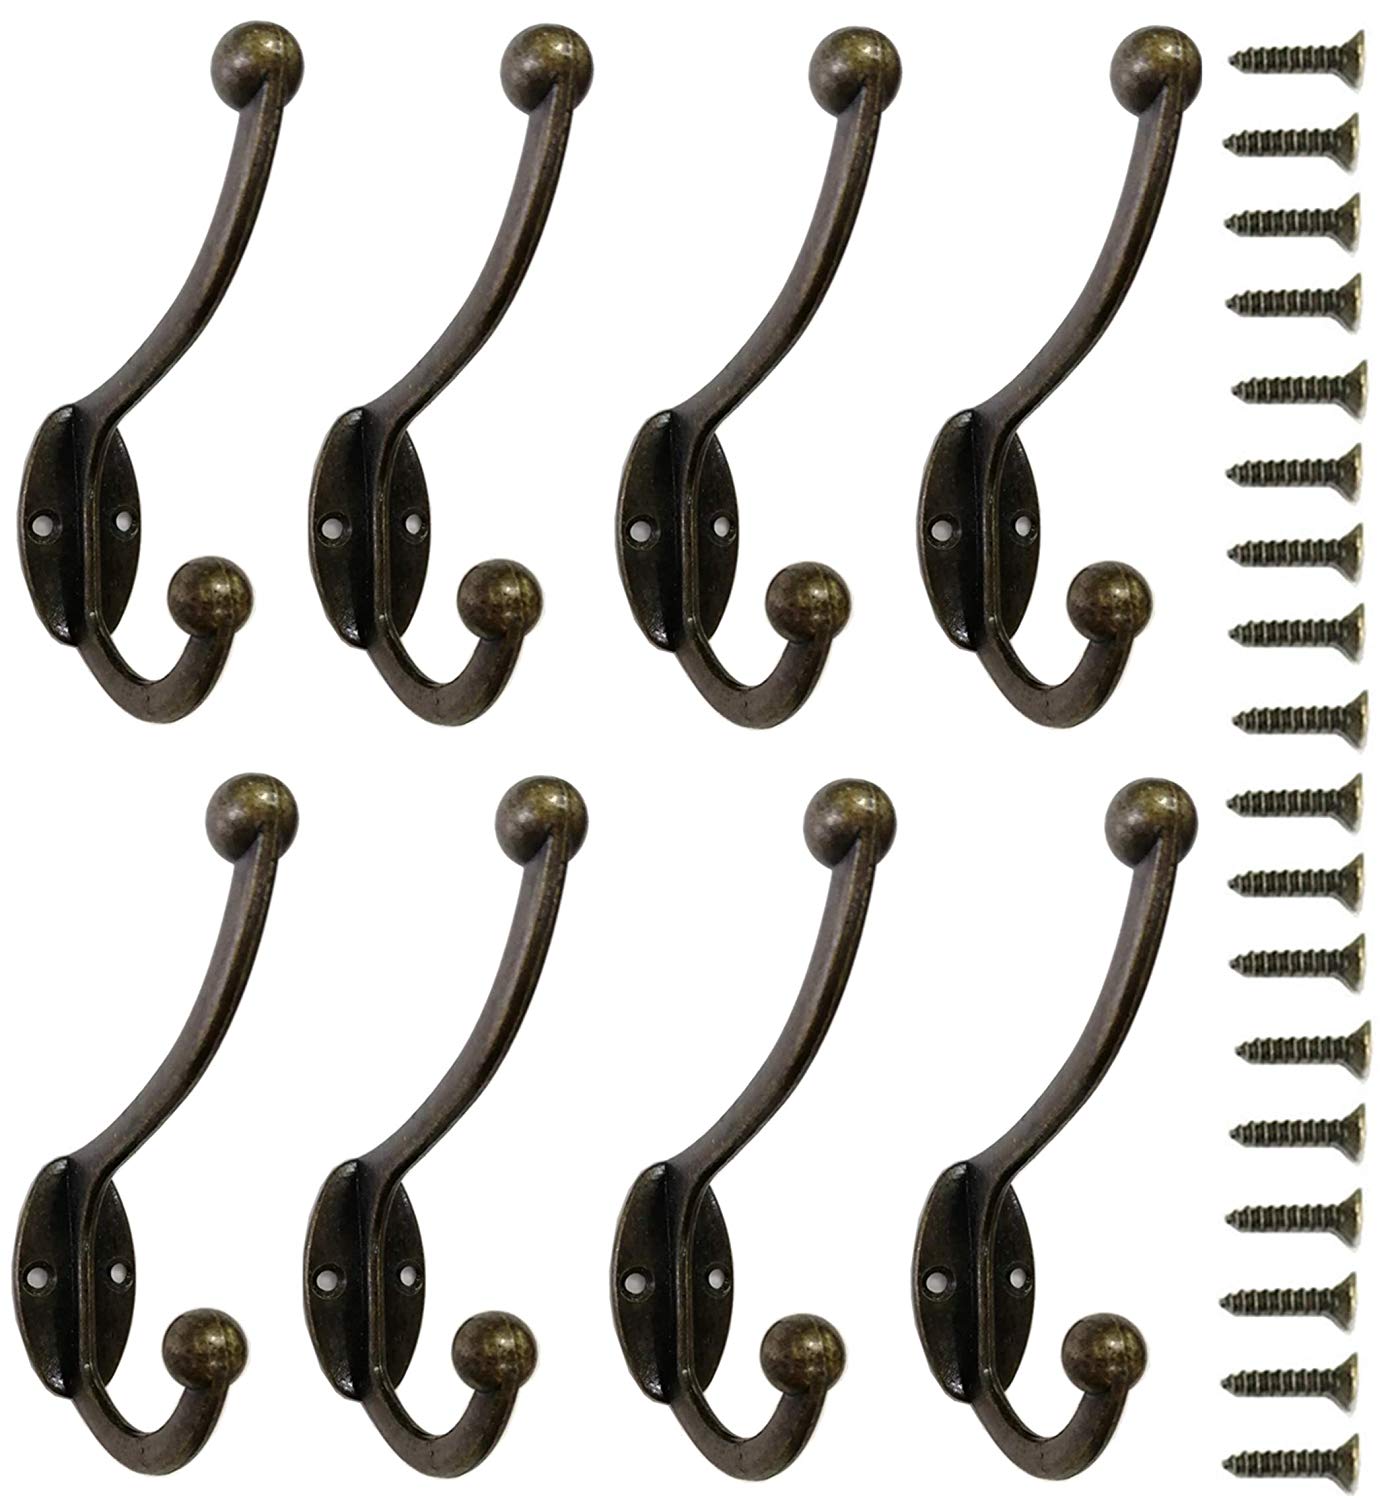 8 Pieces Coat Hooks Wall Mounted 35 LB Utility Hooks Heavy Duty Cup Metal Hooks Dual Robe Hook Rustic Hooks Retro Double Hooks Coat Hanger and 18 Pieces Screws (Bronze Color)